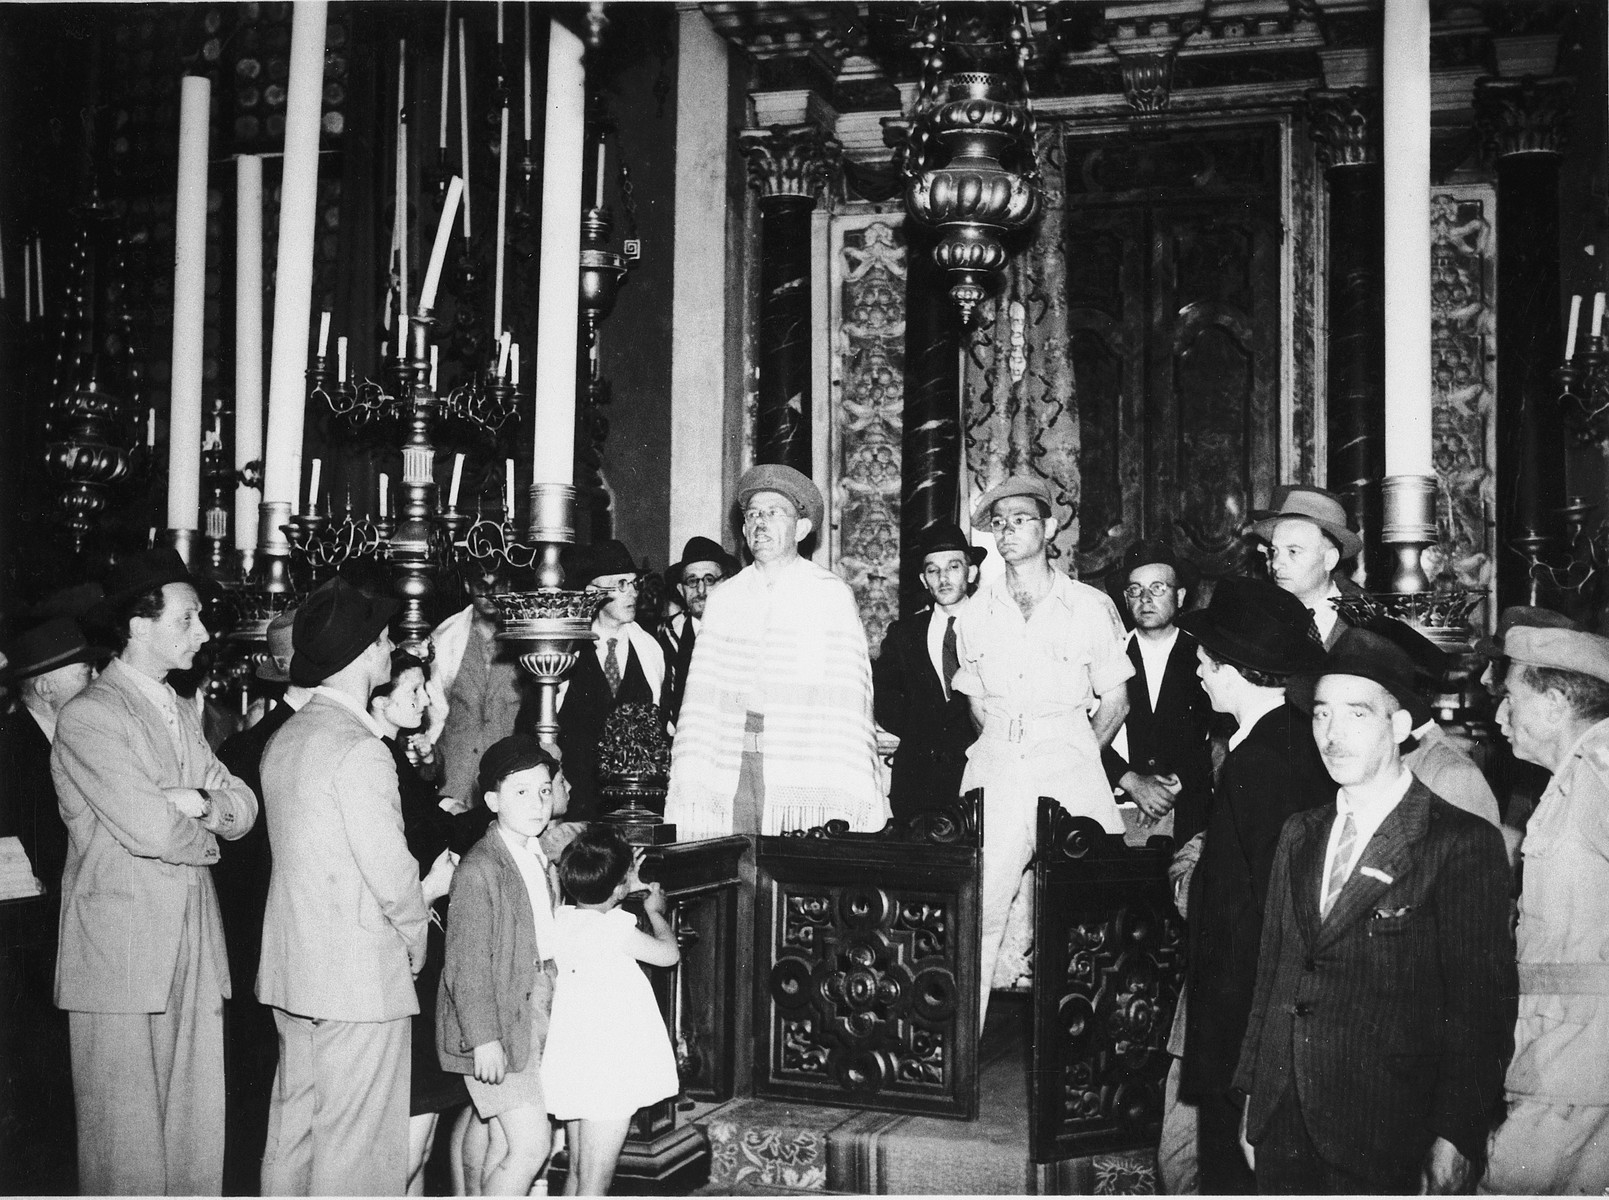 Jewish survivors gather in the Great German Synagogue in Venice.

Pictured to the left of the rabbi is Immanuel Ascarelli wearing his Jewish Brigade uniform.